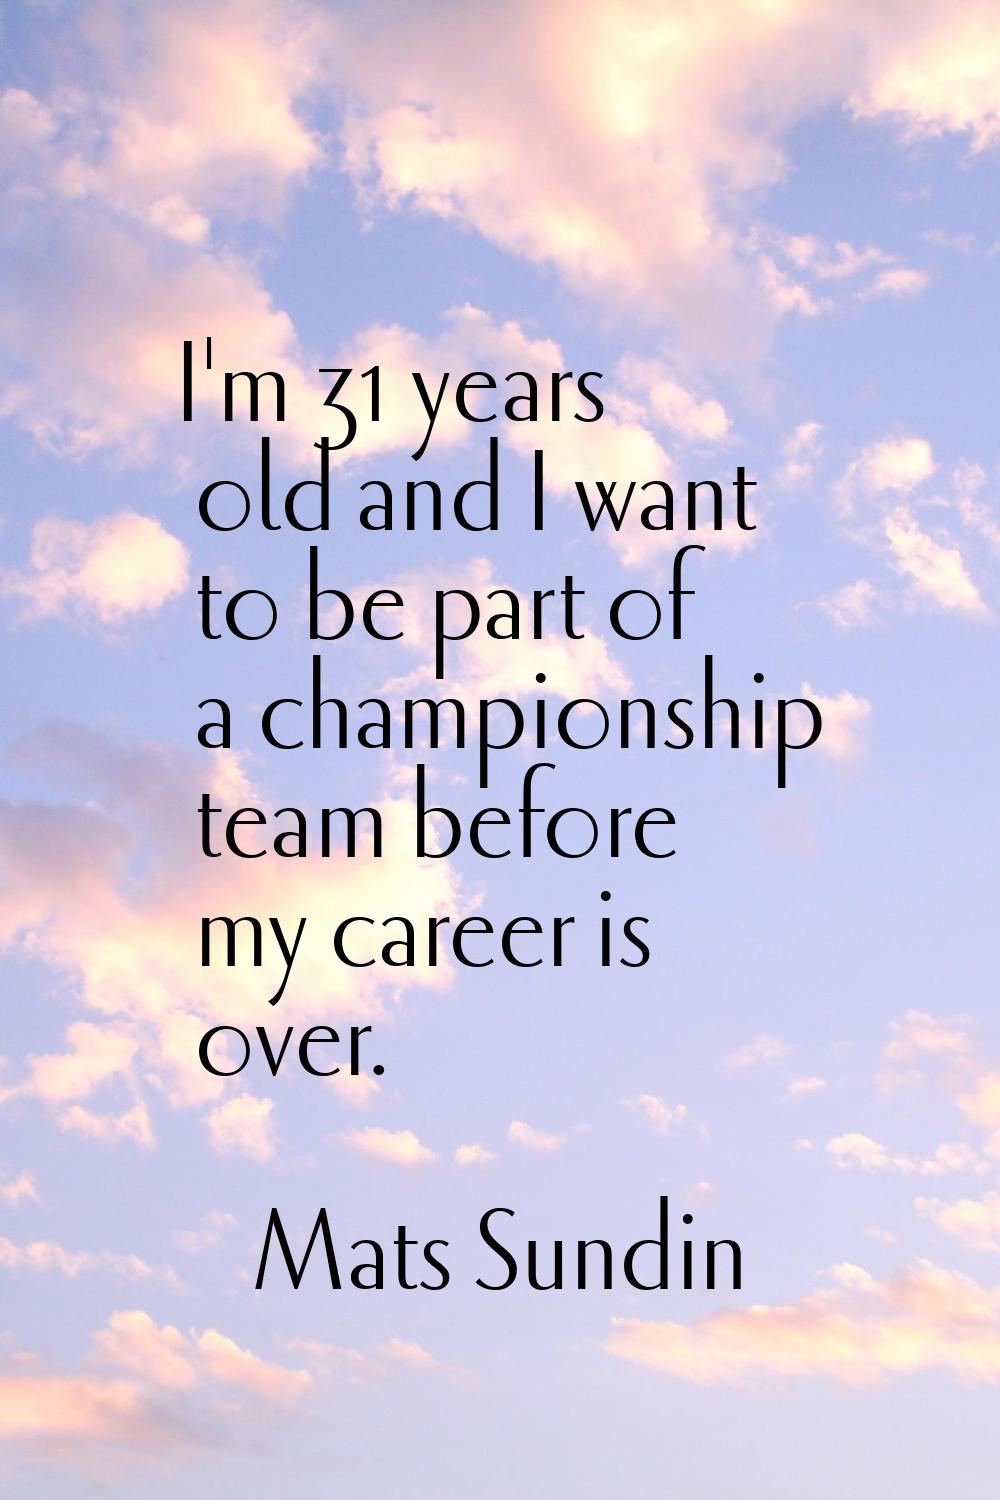 I'm 31 years old and I want to be part of a championship team before my career is over.